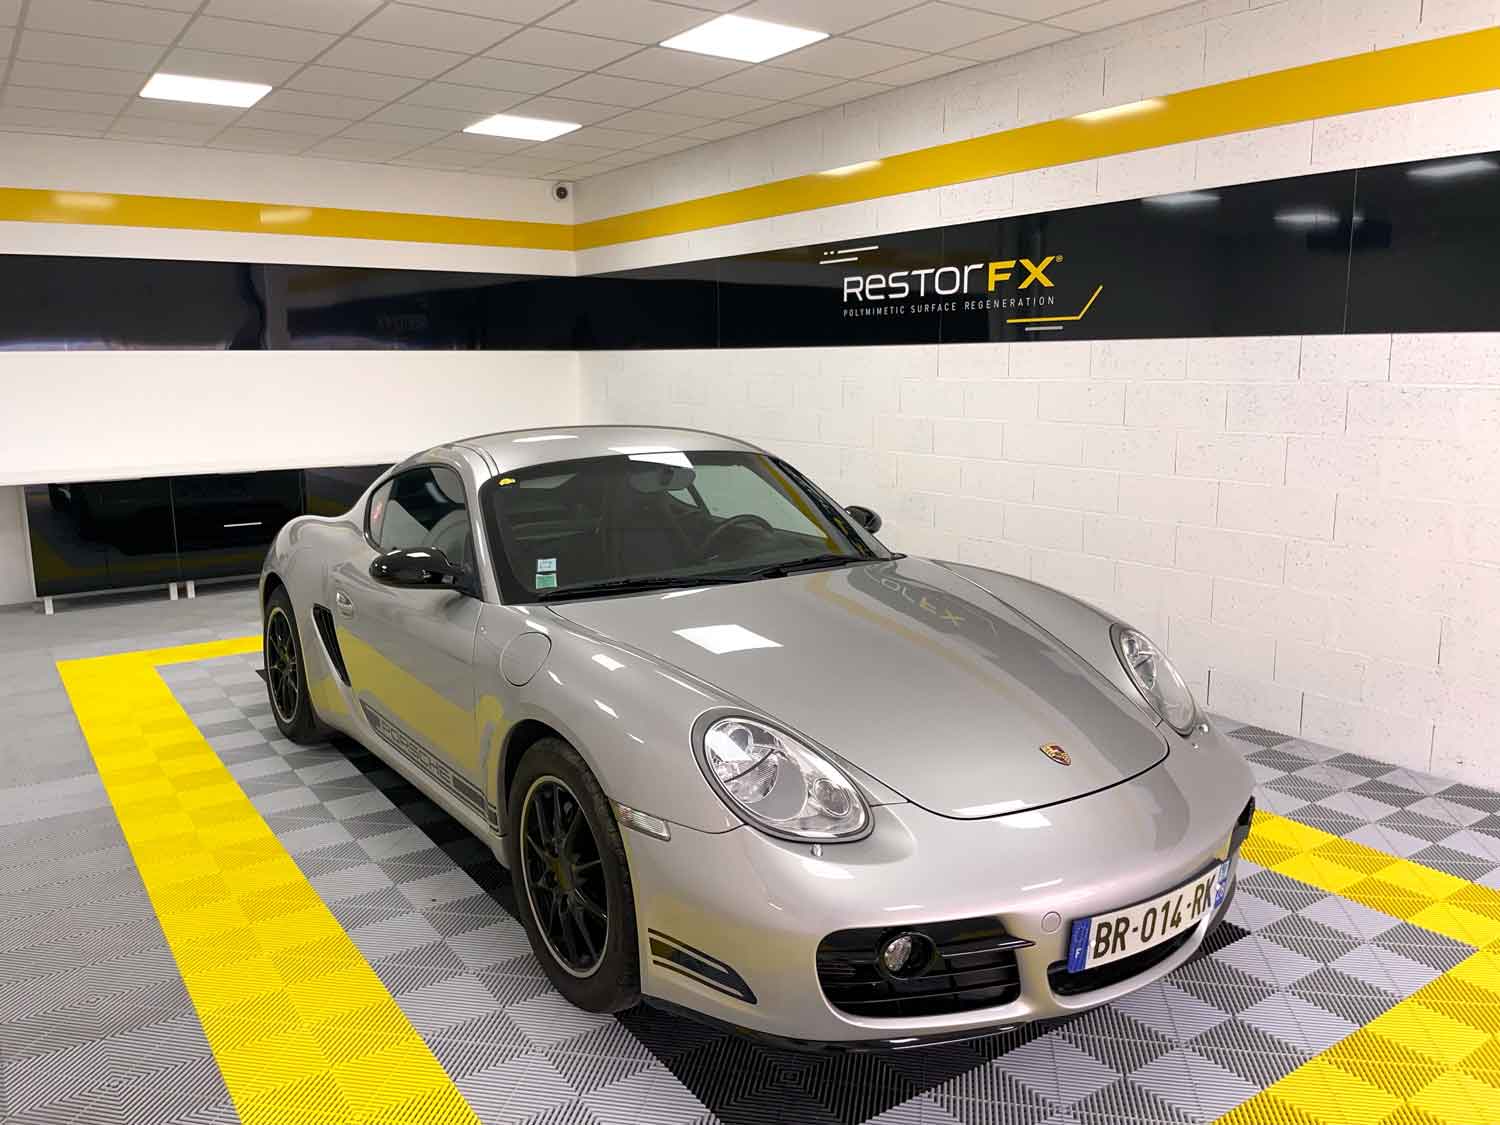 Silver Porsche at RestorFX Chartres center with branded signage and light background